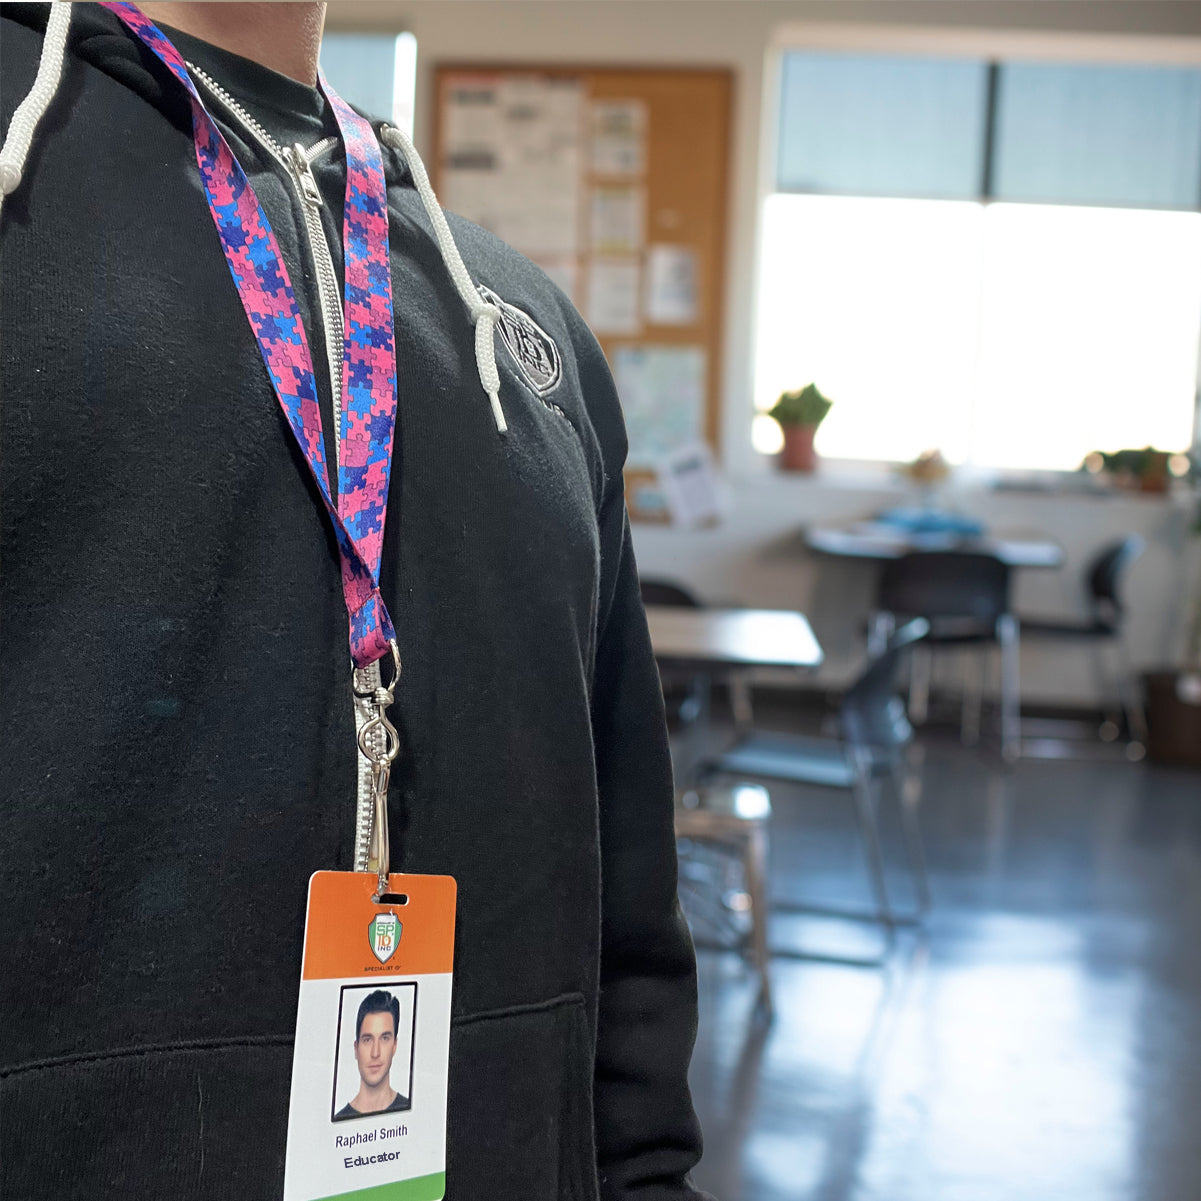 A person wearing a black hoodie with an Autism Awareness Flat Breakaway Lanyard With Swivel Hook (2138-5281, 2138-5282) displaying a badge labeled "Raphael Simh, Educator" stands in a classroom with desks and a window in the background.